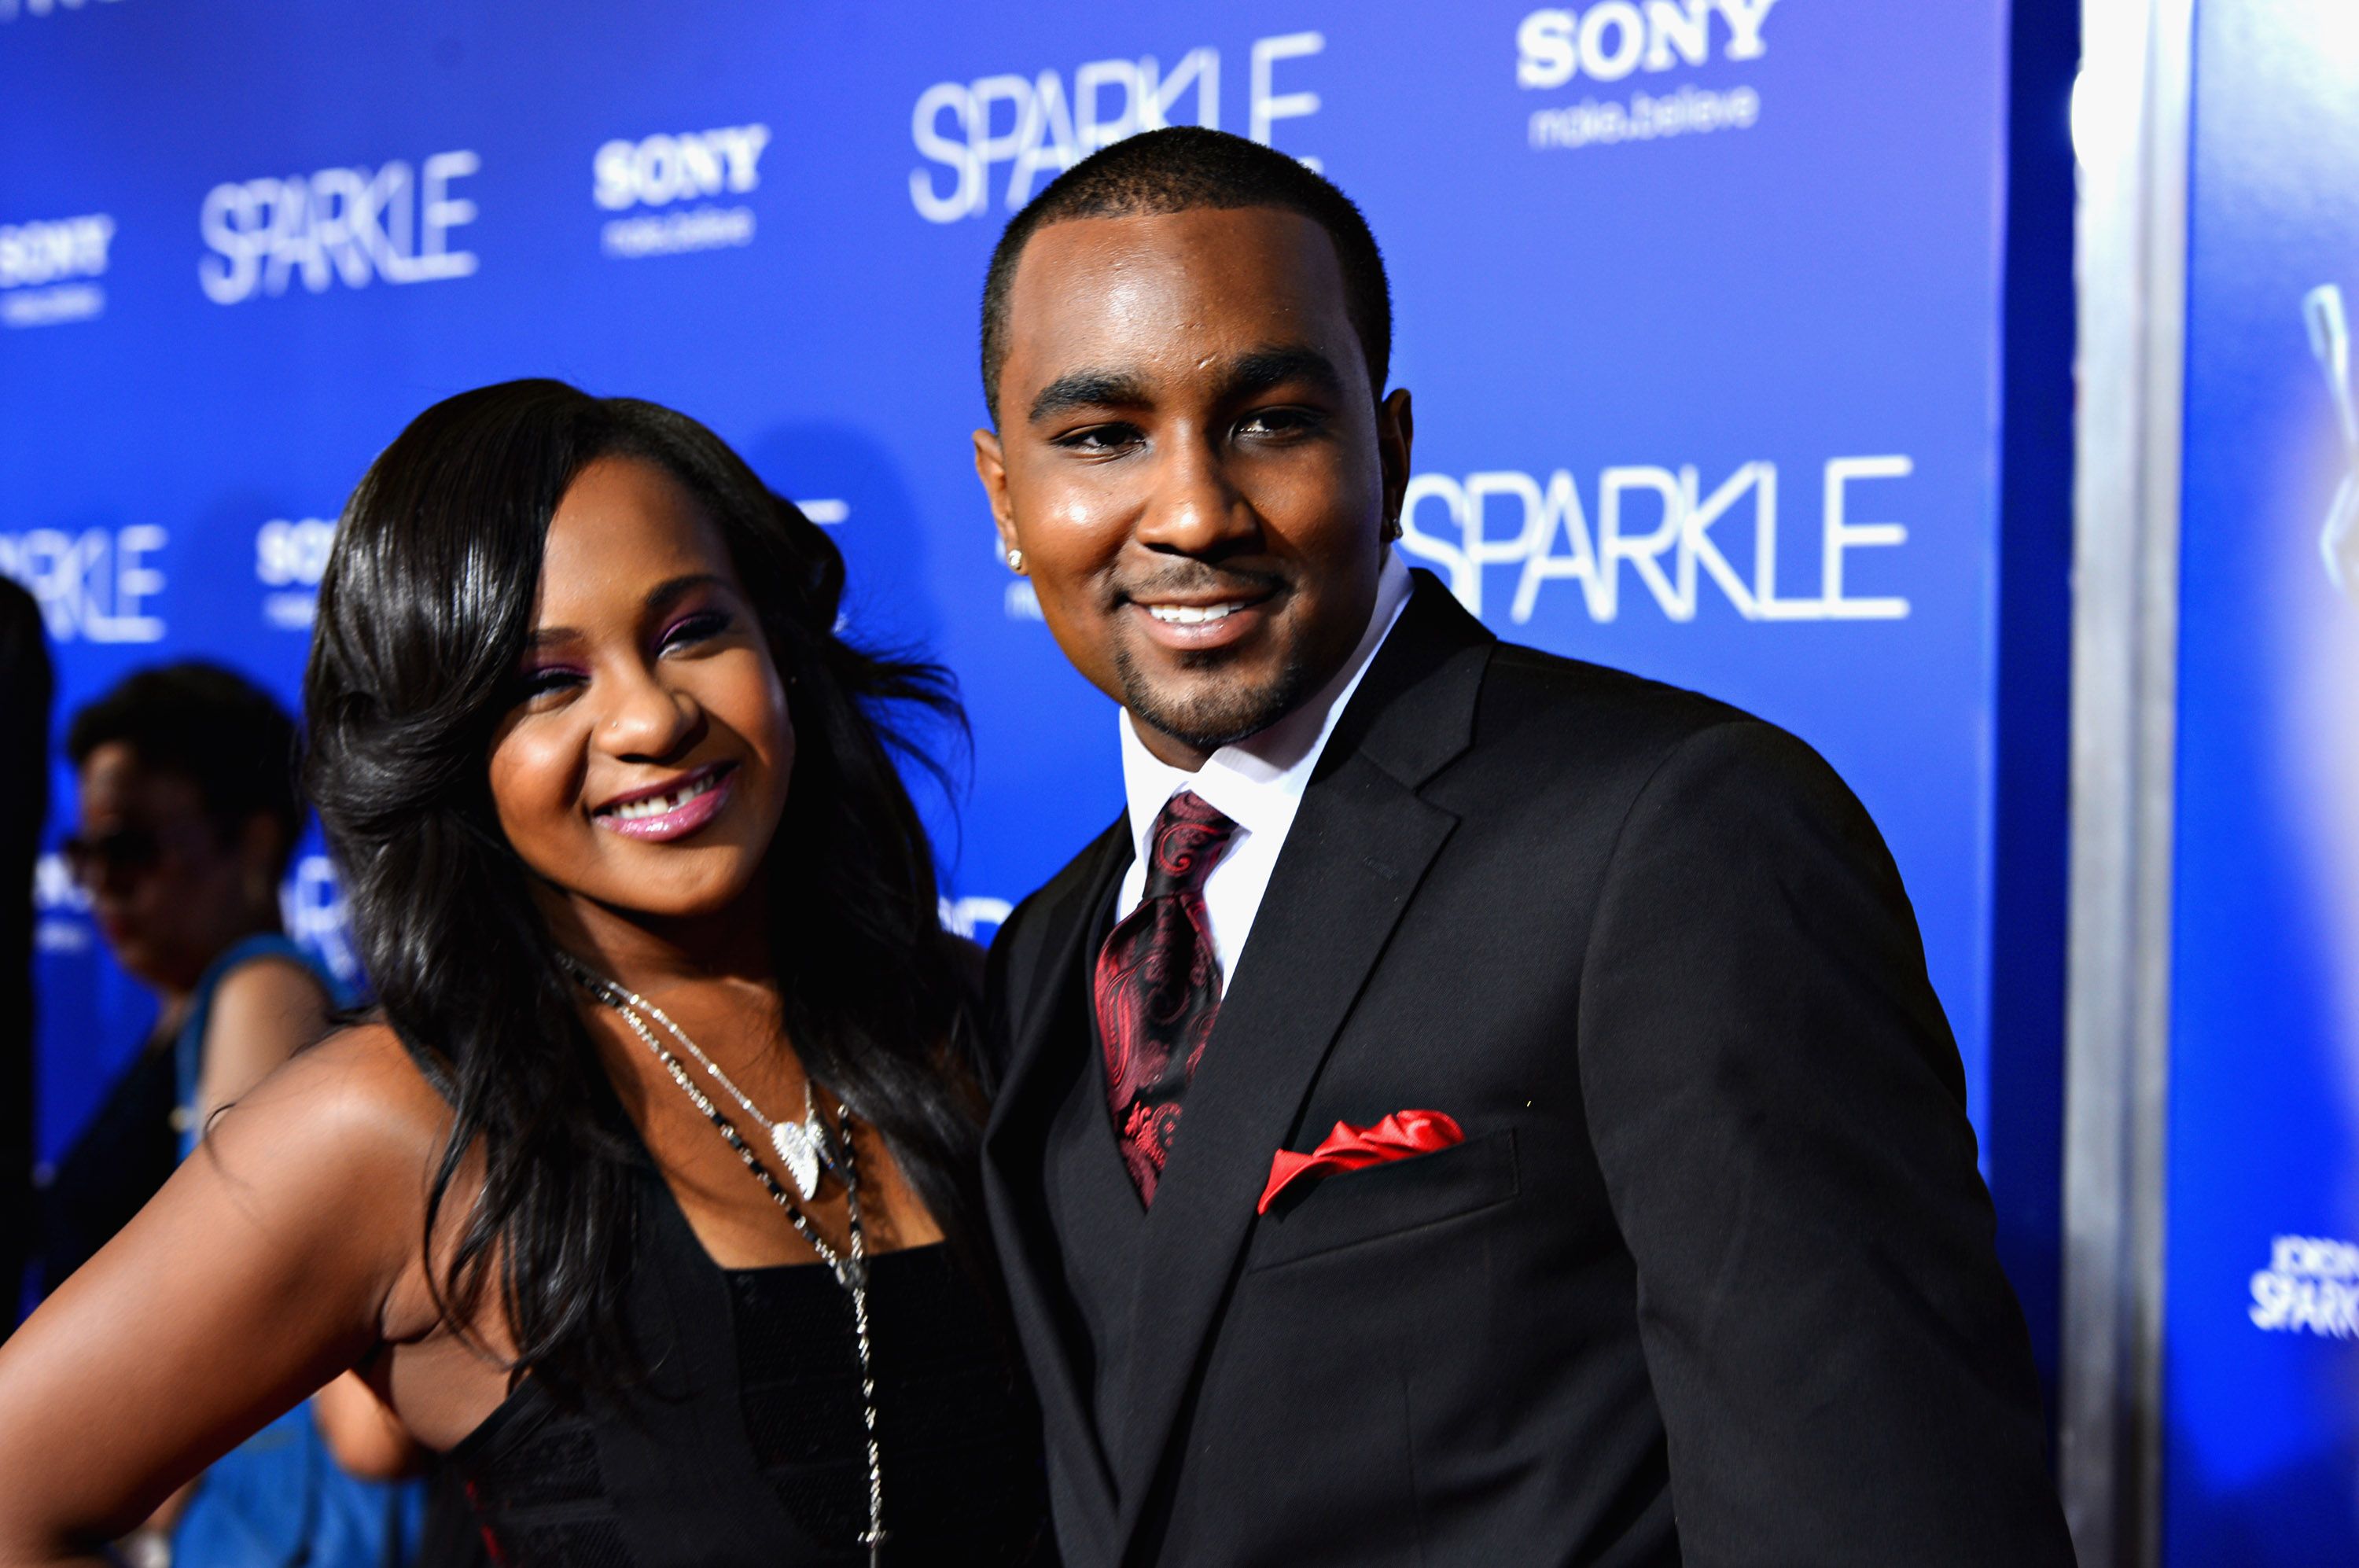 The late Bobbi Kristina Brown and Nick Gordon at Tri-Star Pictures' "Sparkle" premiere at Grauman's Chinese Theatre on August 16, 2012 | Photo: Getty Images